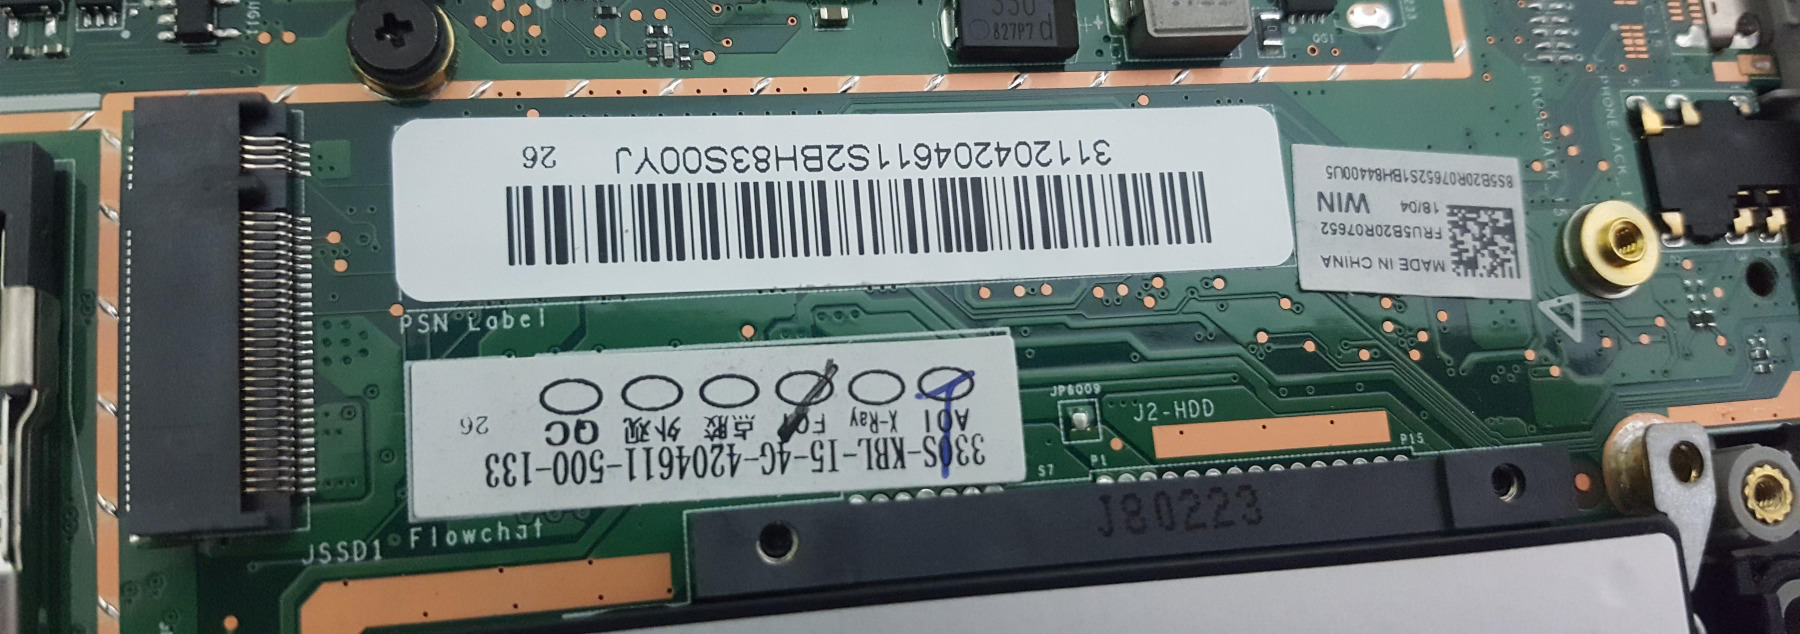 An M.2 slot in a laptop, intended for an SSD.